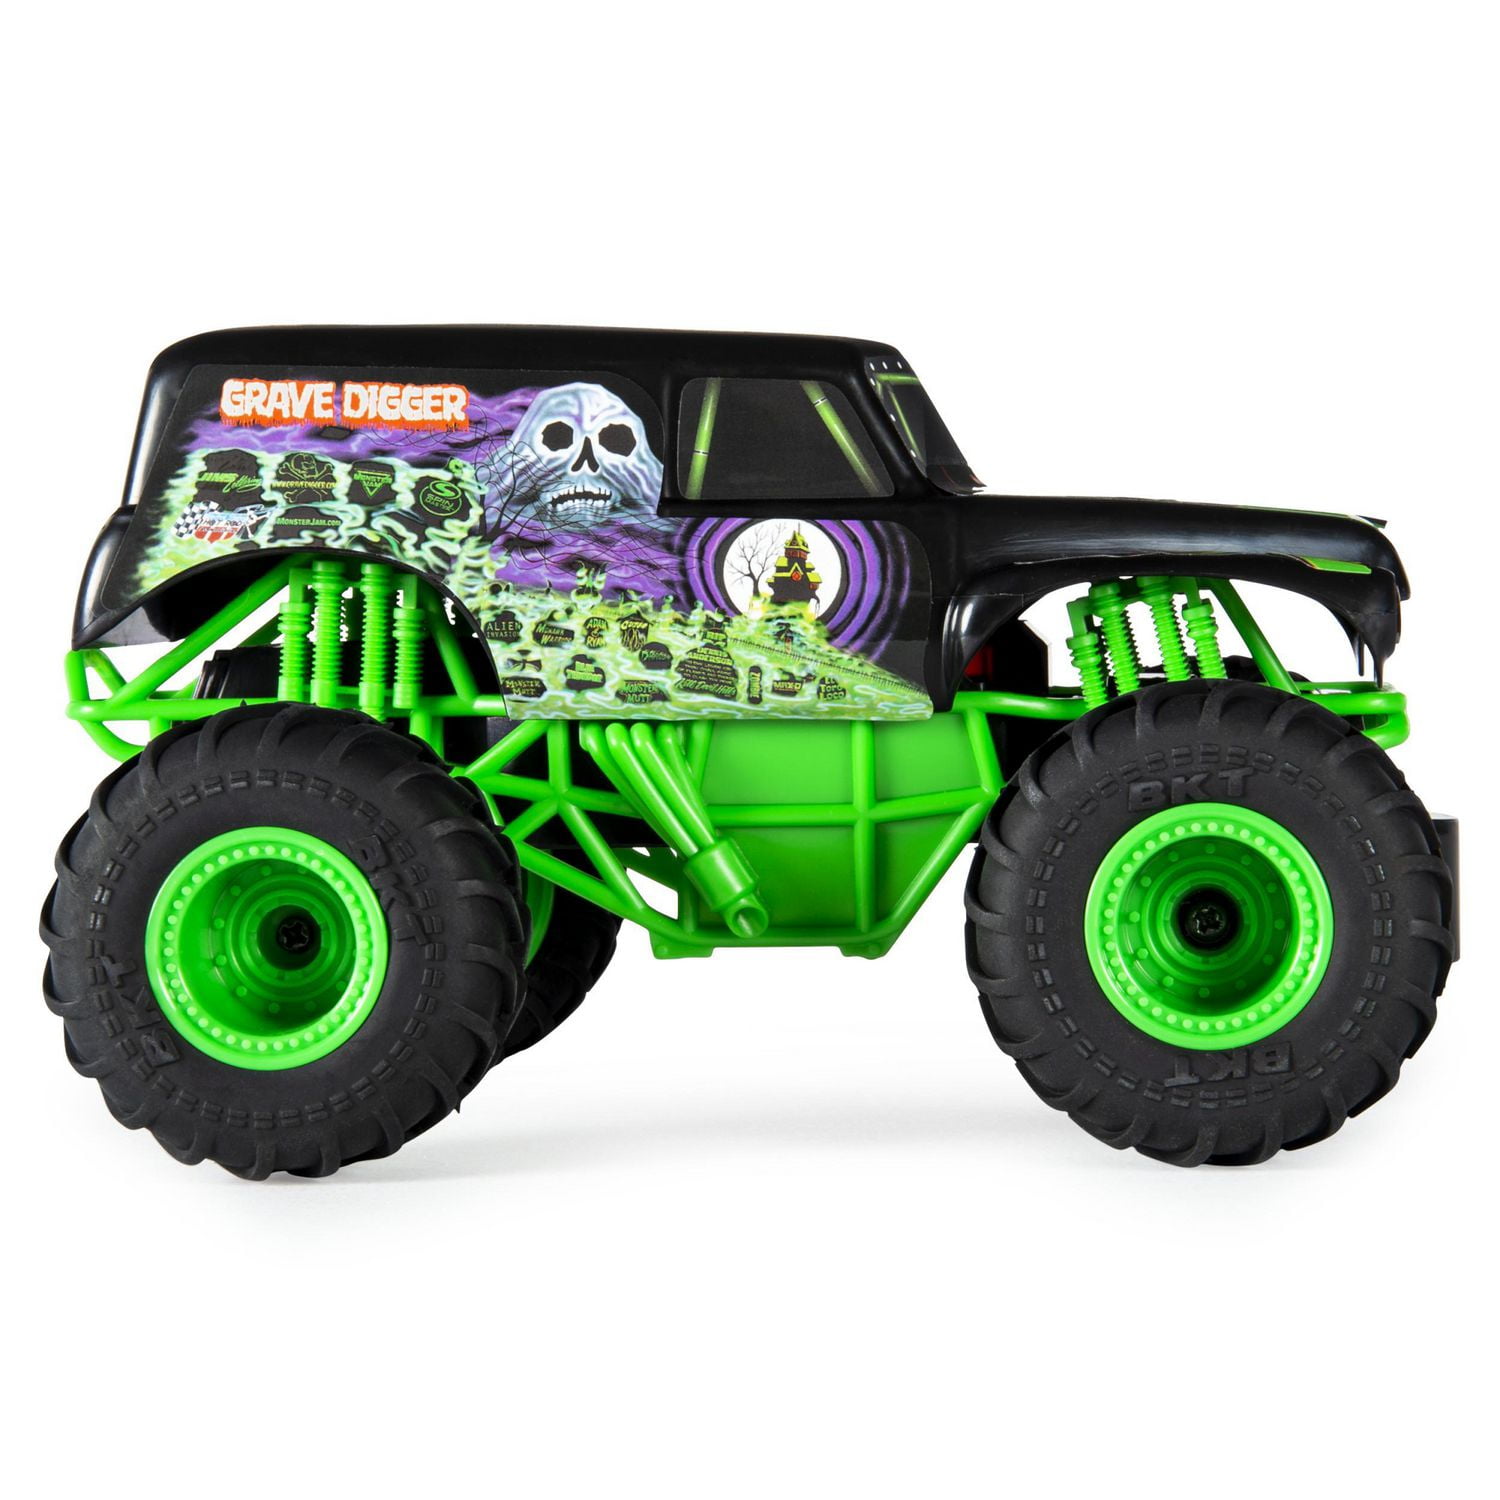 Intimo Monster Jam Grave Digger Monster Truck Dual Compartment